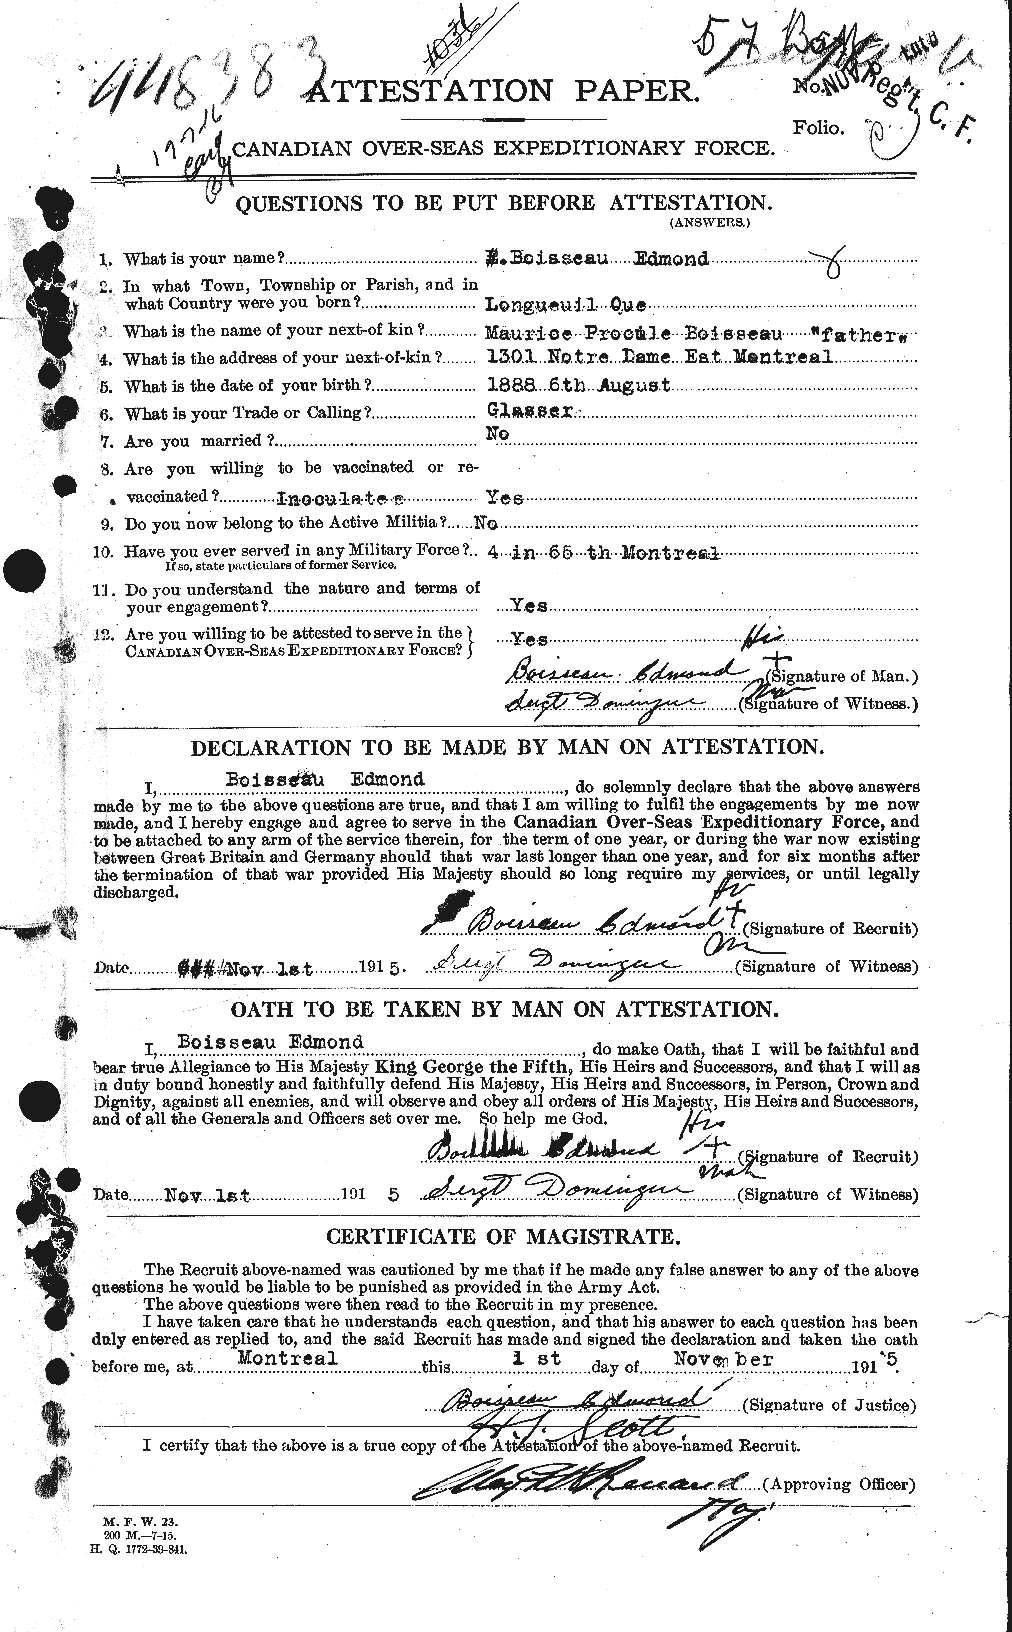 Personnel Records of the First World War - CEF 249435a